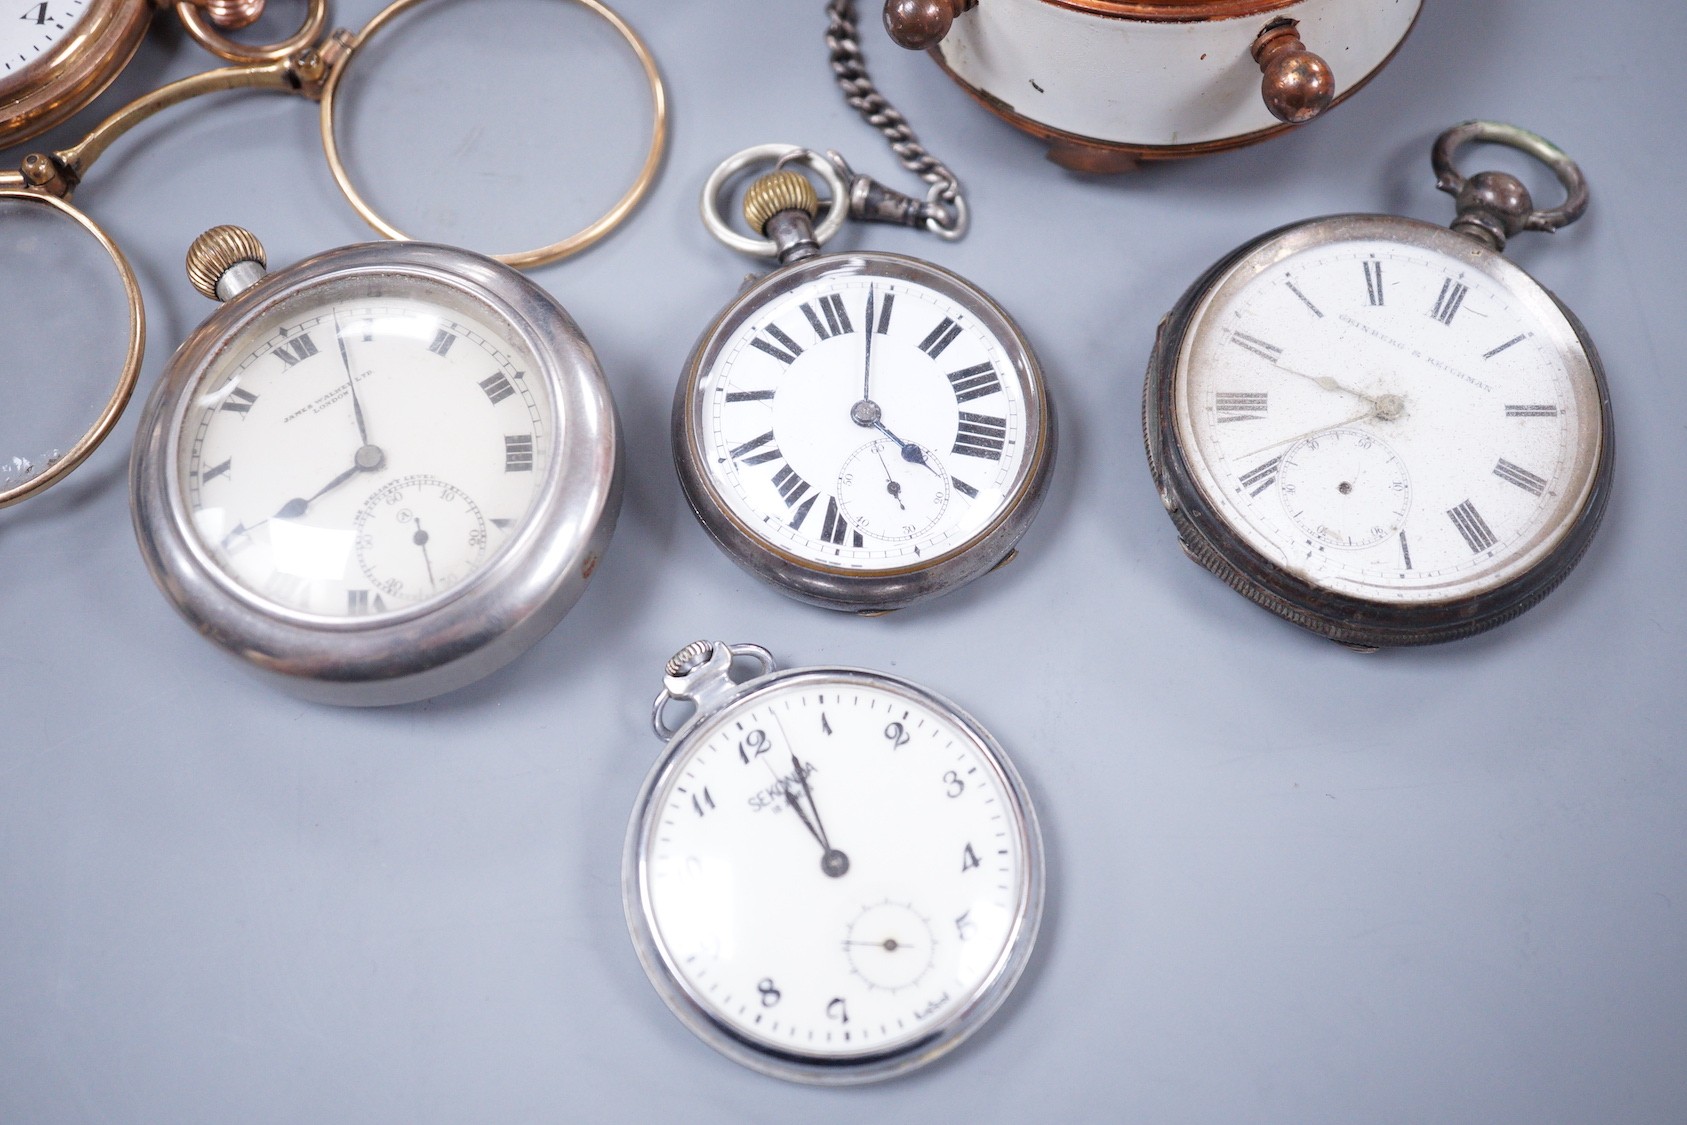 A small collection of six assorted pocket watches, including a silver open face, gun metal on a silver albert and gold plated, a Estyma alarm clock and a pair of gold plated lorgnettes.